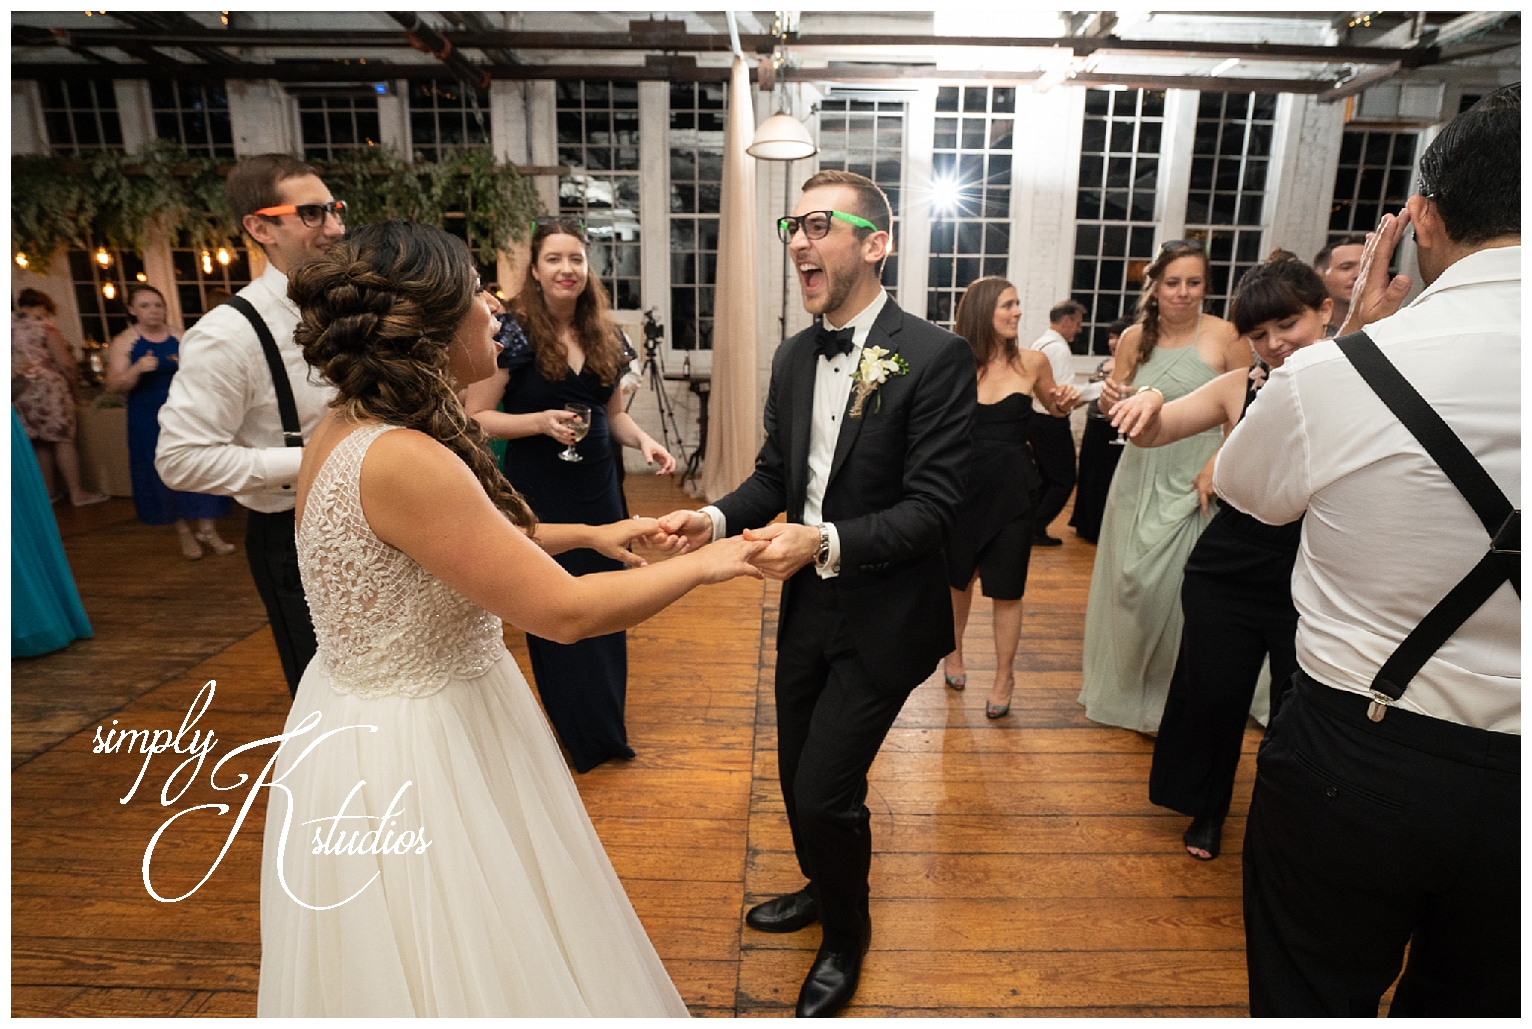 Reception Dancing at The Lace Factory.jpg